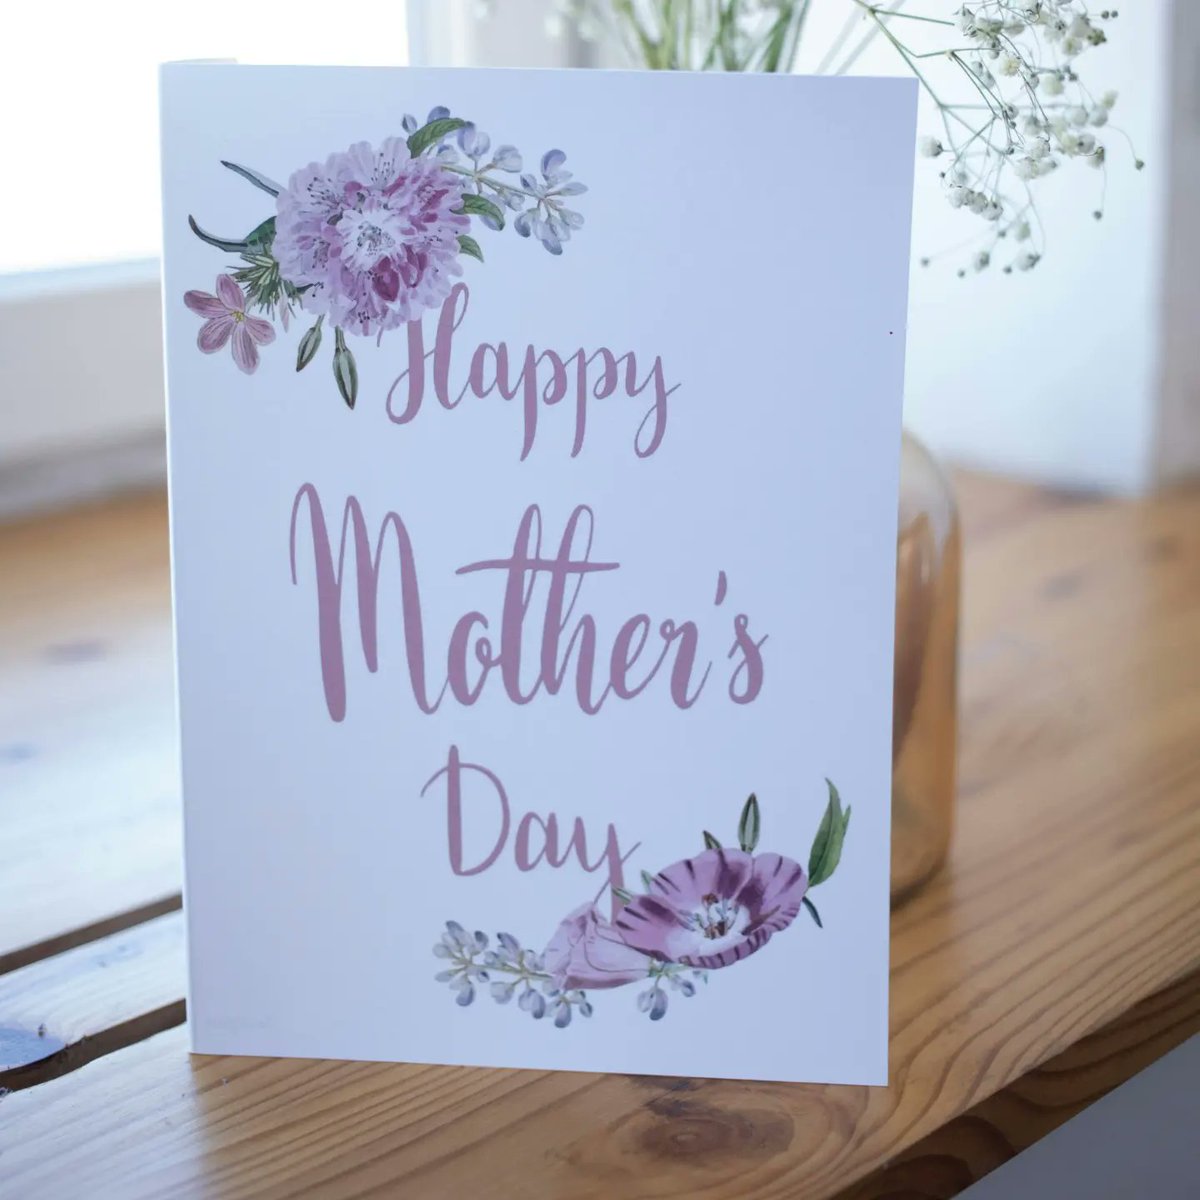 From heartfelt keepsakes to luxurious indulgences, find the perfect present to celebrate the incredible woman who means the world to you.

Check it out! 🔗👇🔥
thesuperstacks.com

#MothersDayGifts #GiftsForHer #ThoughtfulGifts #CelebrateMom #CherishHer #LoveYouMom